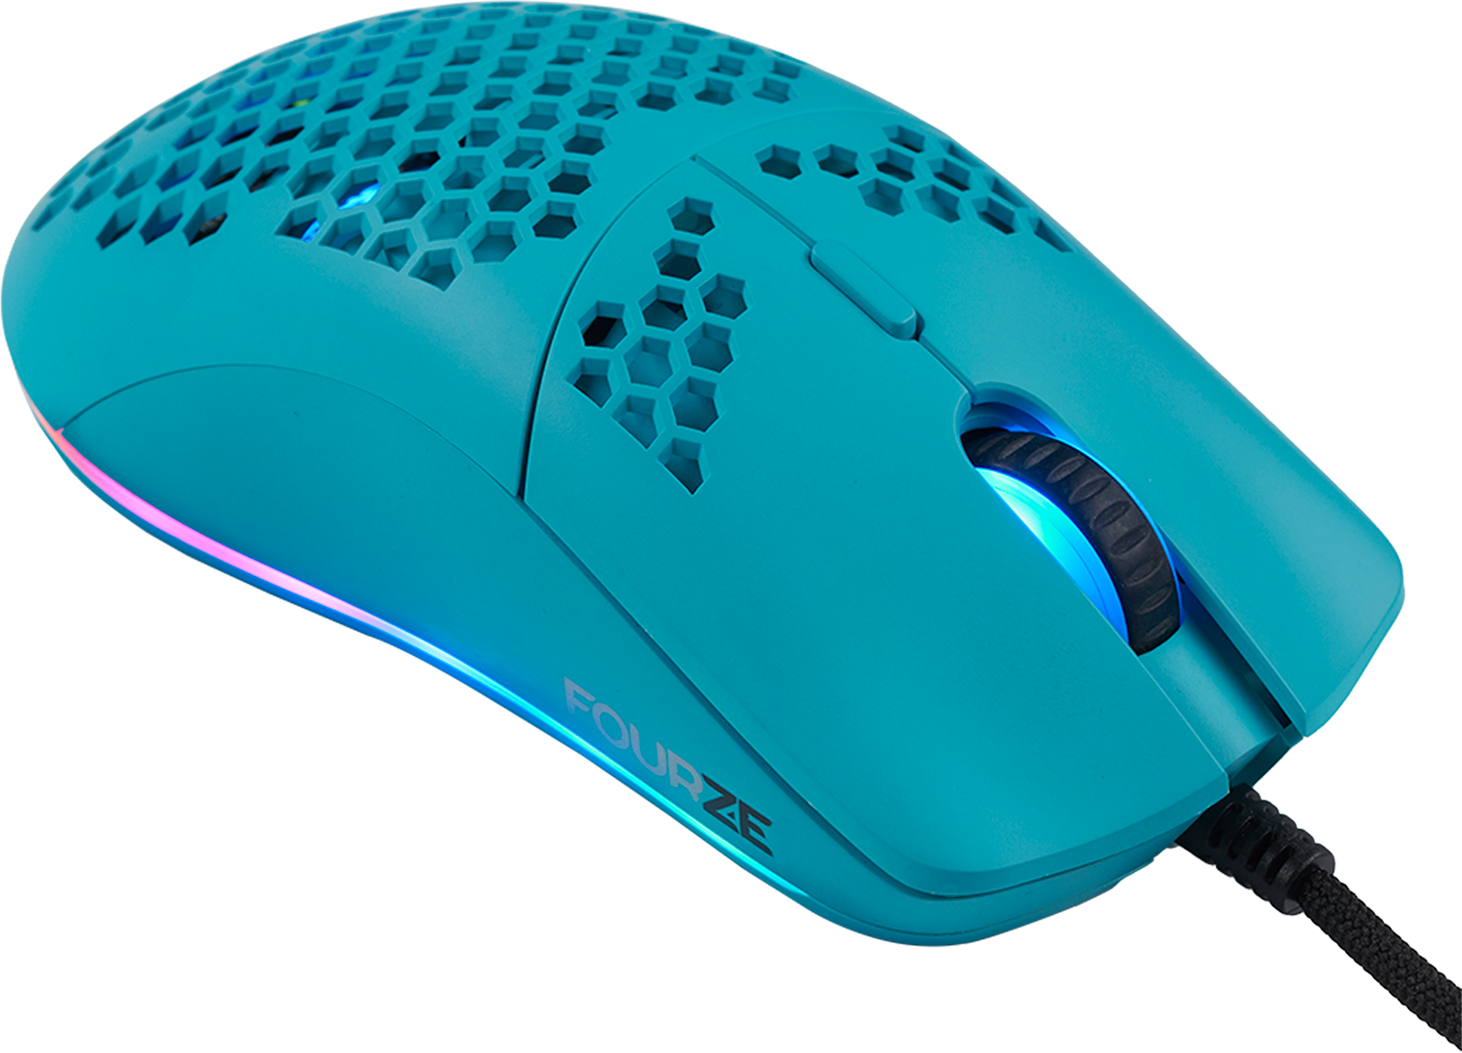 5713552000897 Fourze GM800 Gaming Mouse RGB Turquoise - Gaming mus Computer & IT,Gaming,Gaming mus 3400003420 FZ-GM800-003